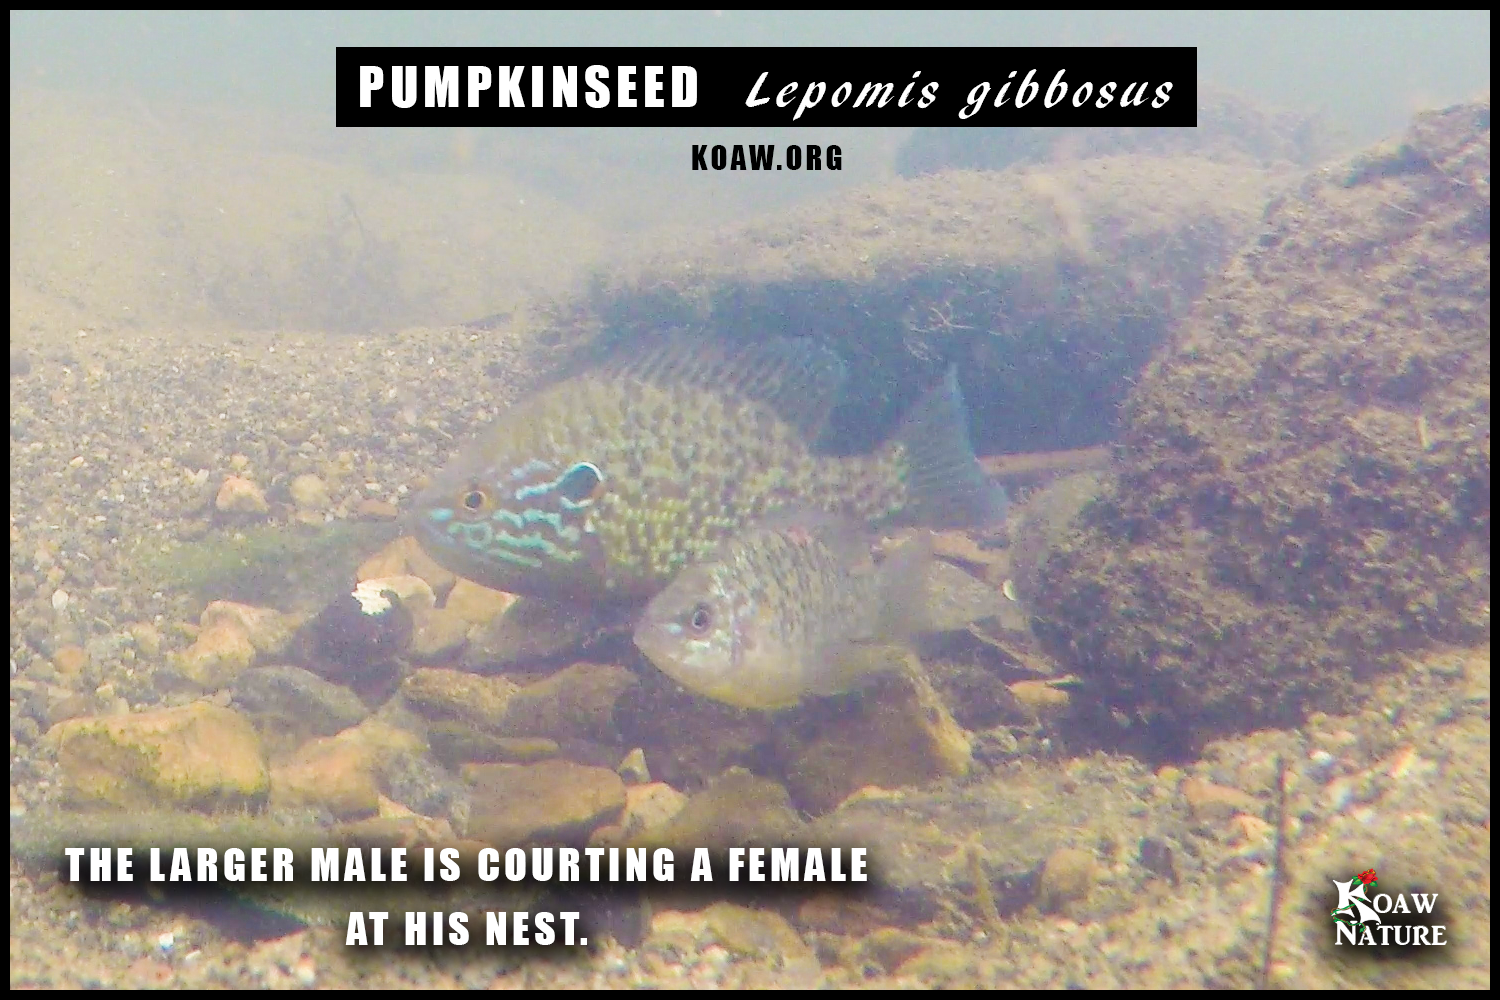 Pumpkinseed courting Koaw Nature.png